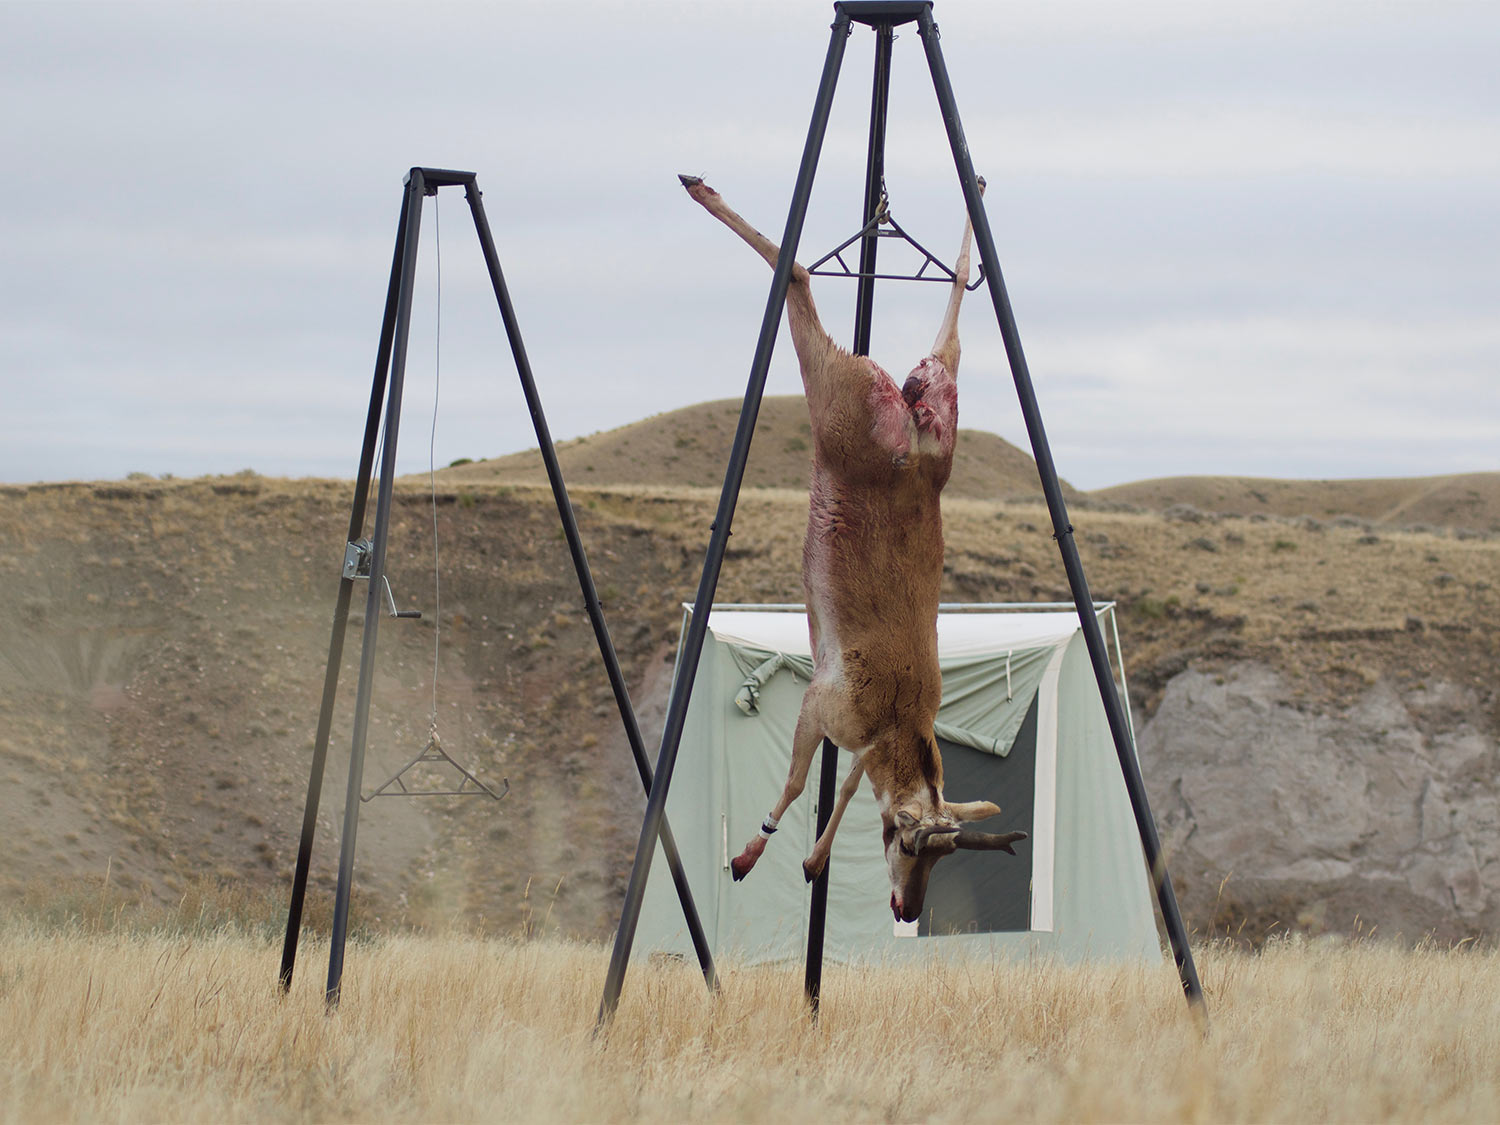 A pronghorn antelope hangs from a skinning station in a large open plain.